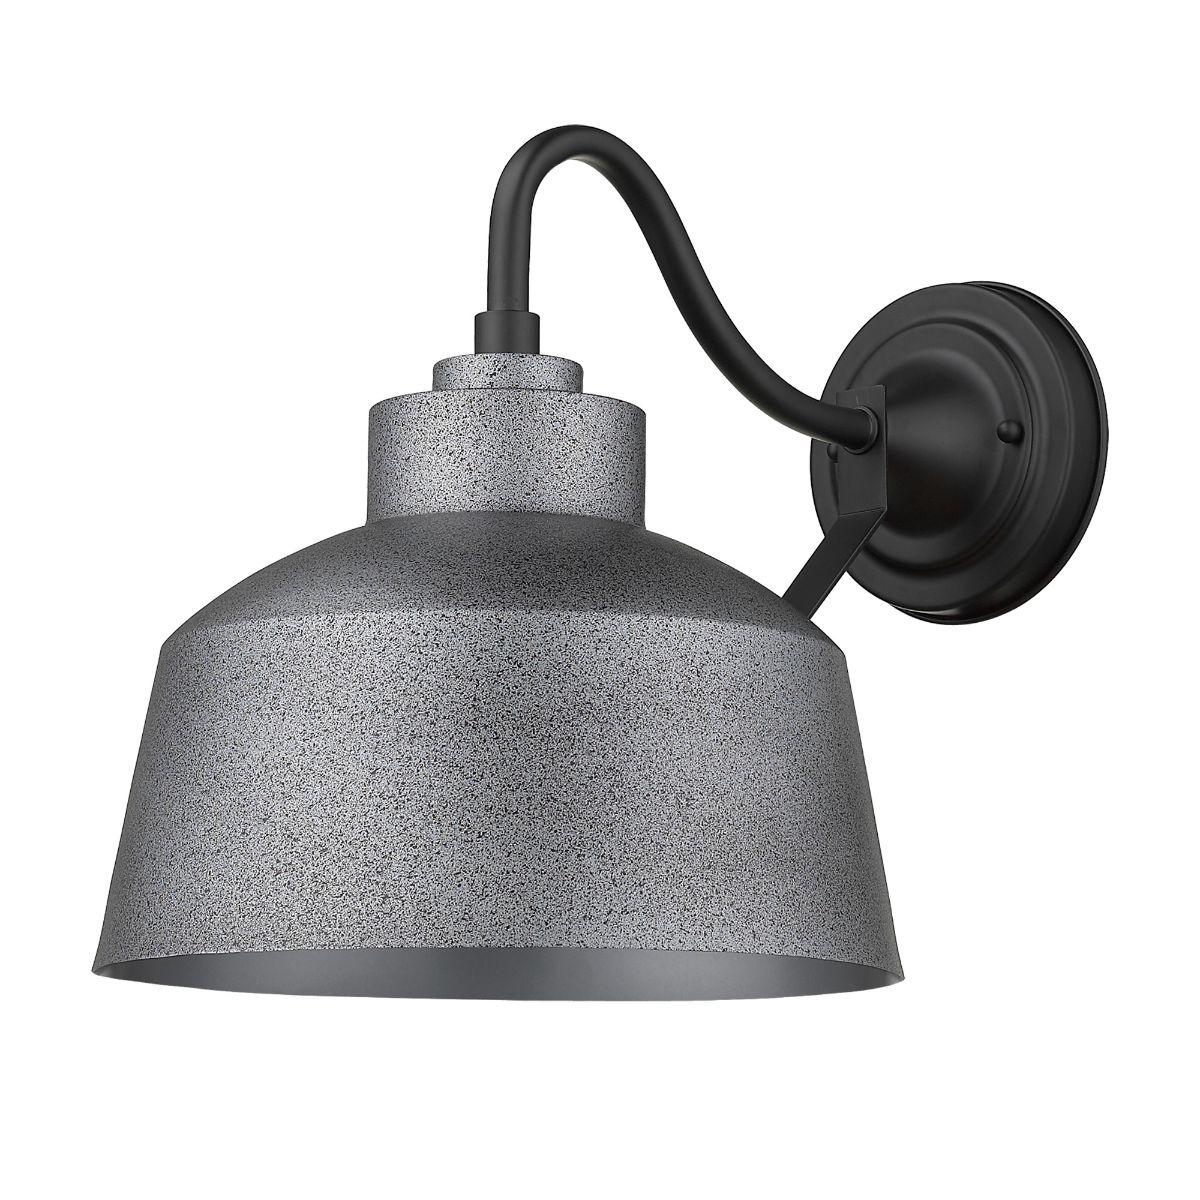 Barnes 9 In. Outdoor Wall Sconce Gray Finish